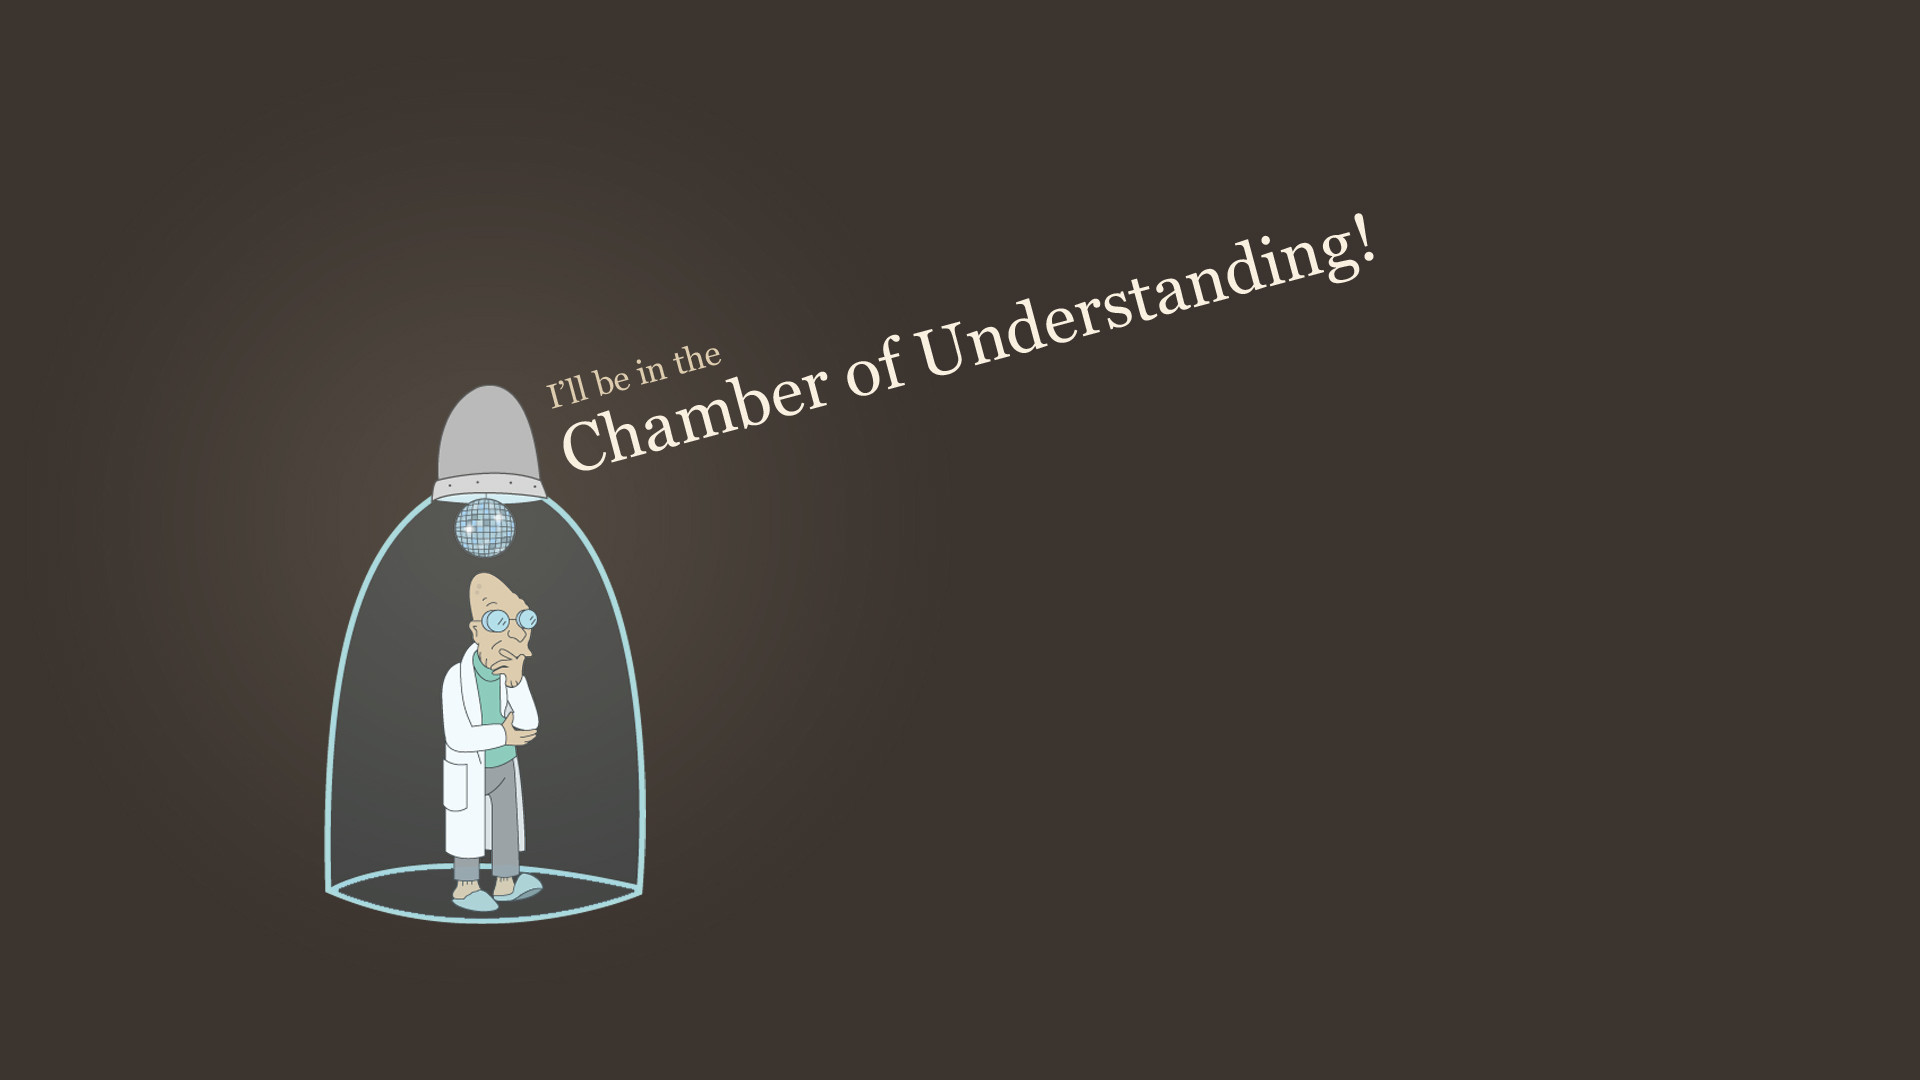 1920x1080 I'll be in the Chamber of Understanding!